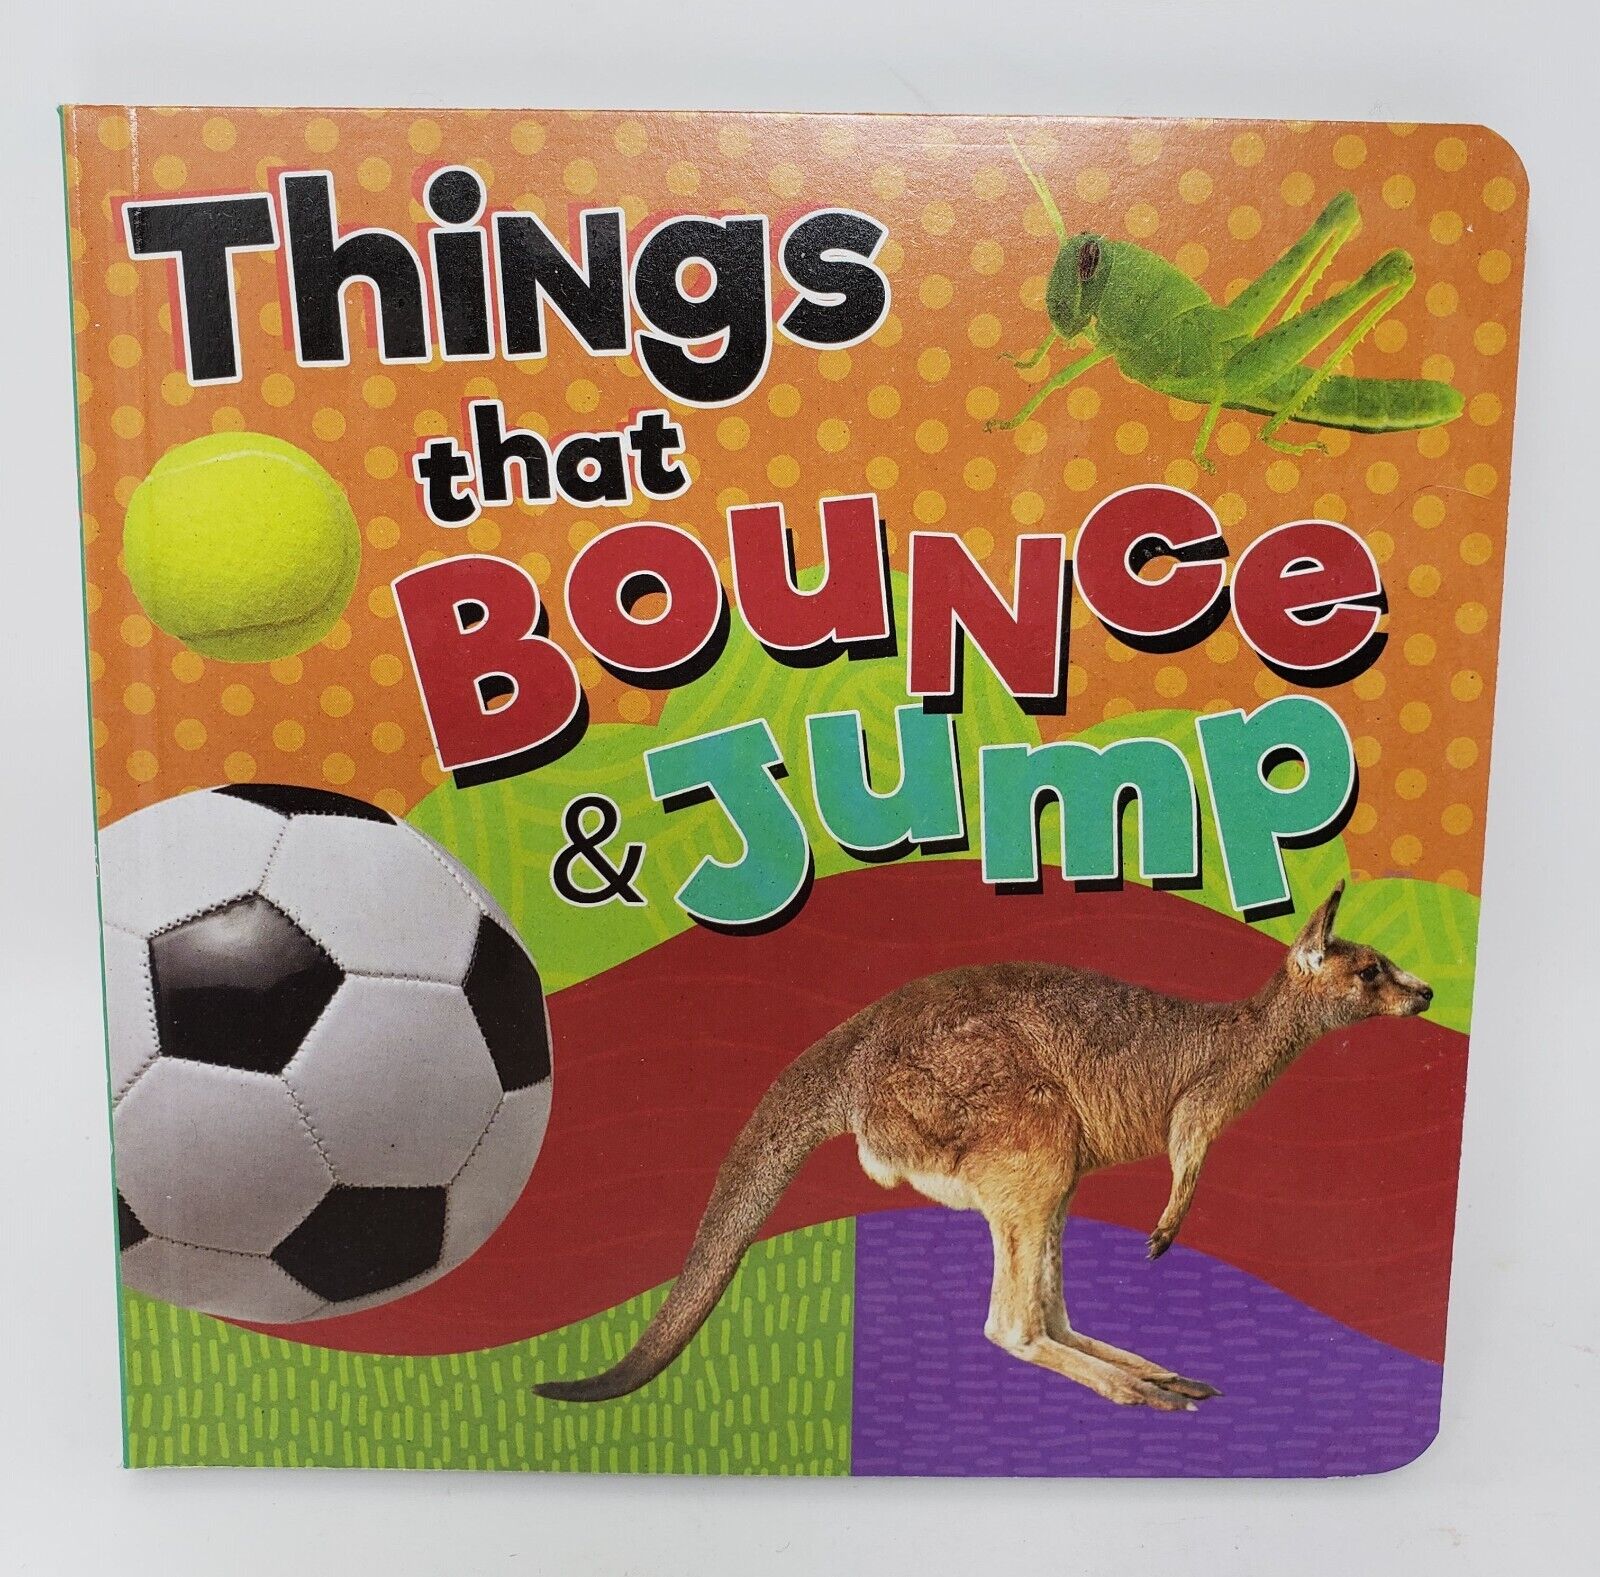 brandon burris recommends Things That Bounce